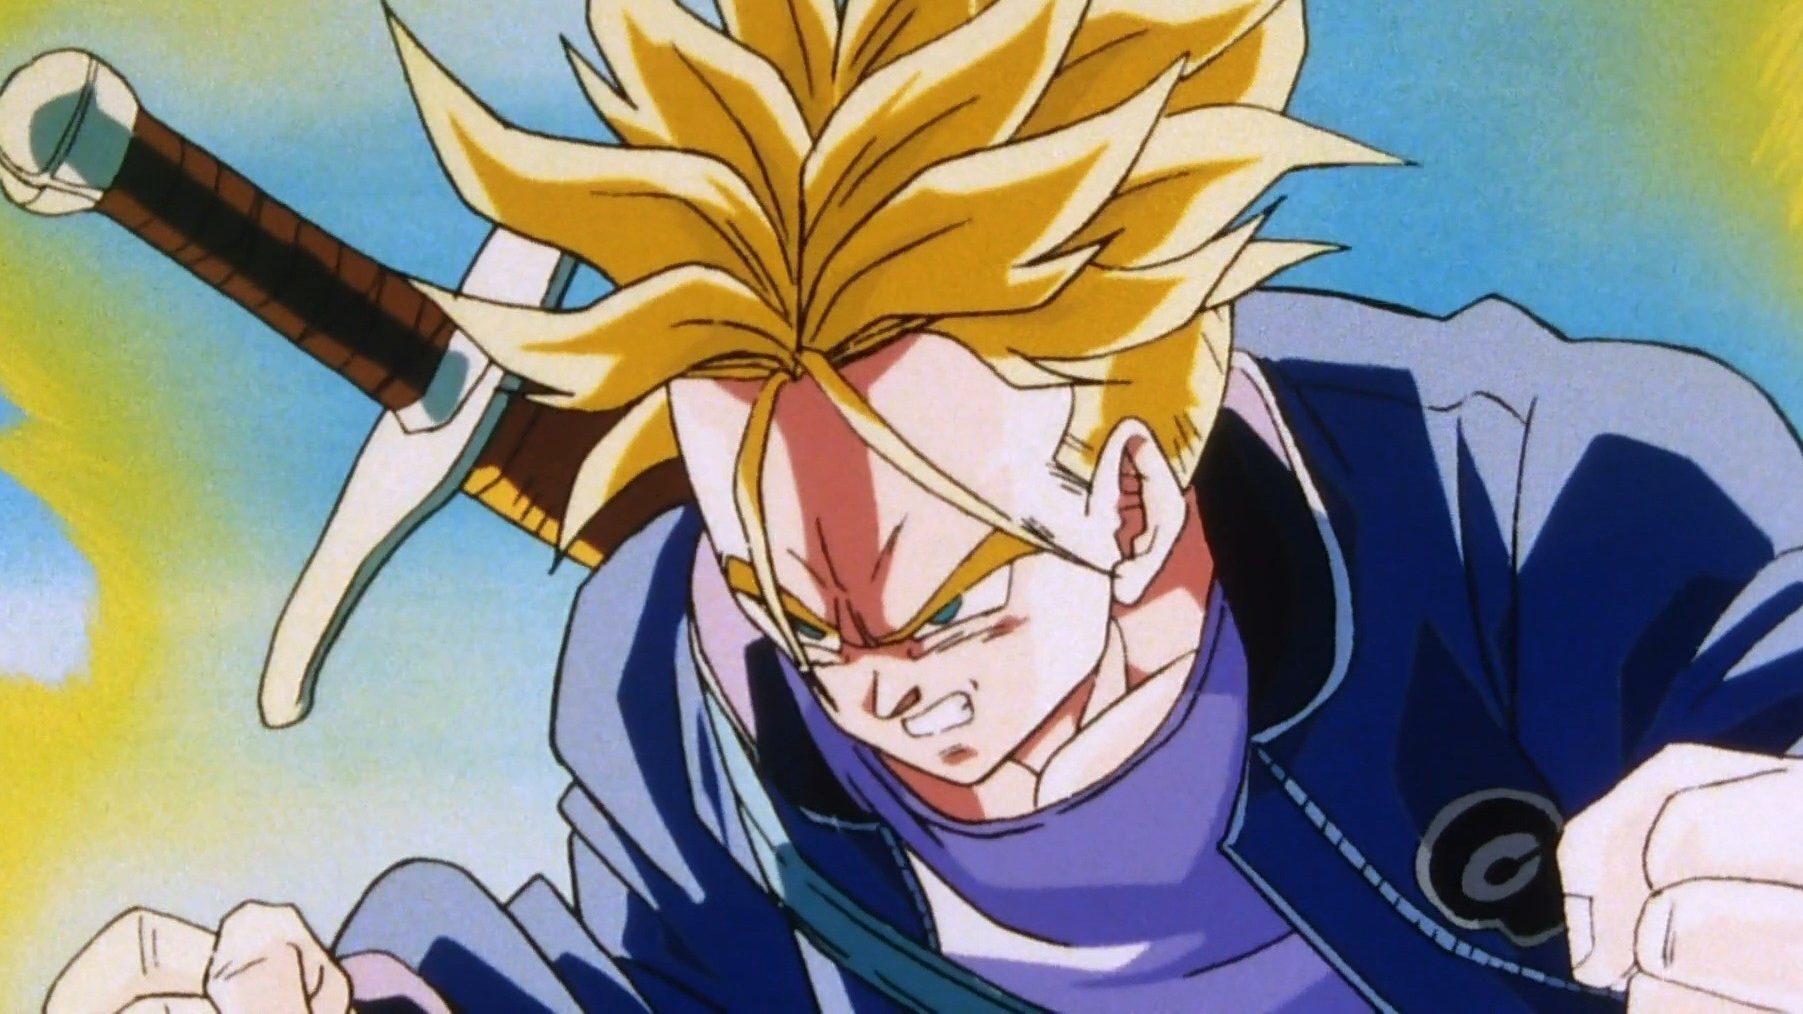 Future Trunks looks very upset and has hands in fists.